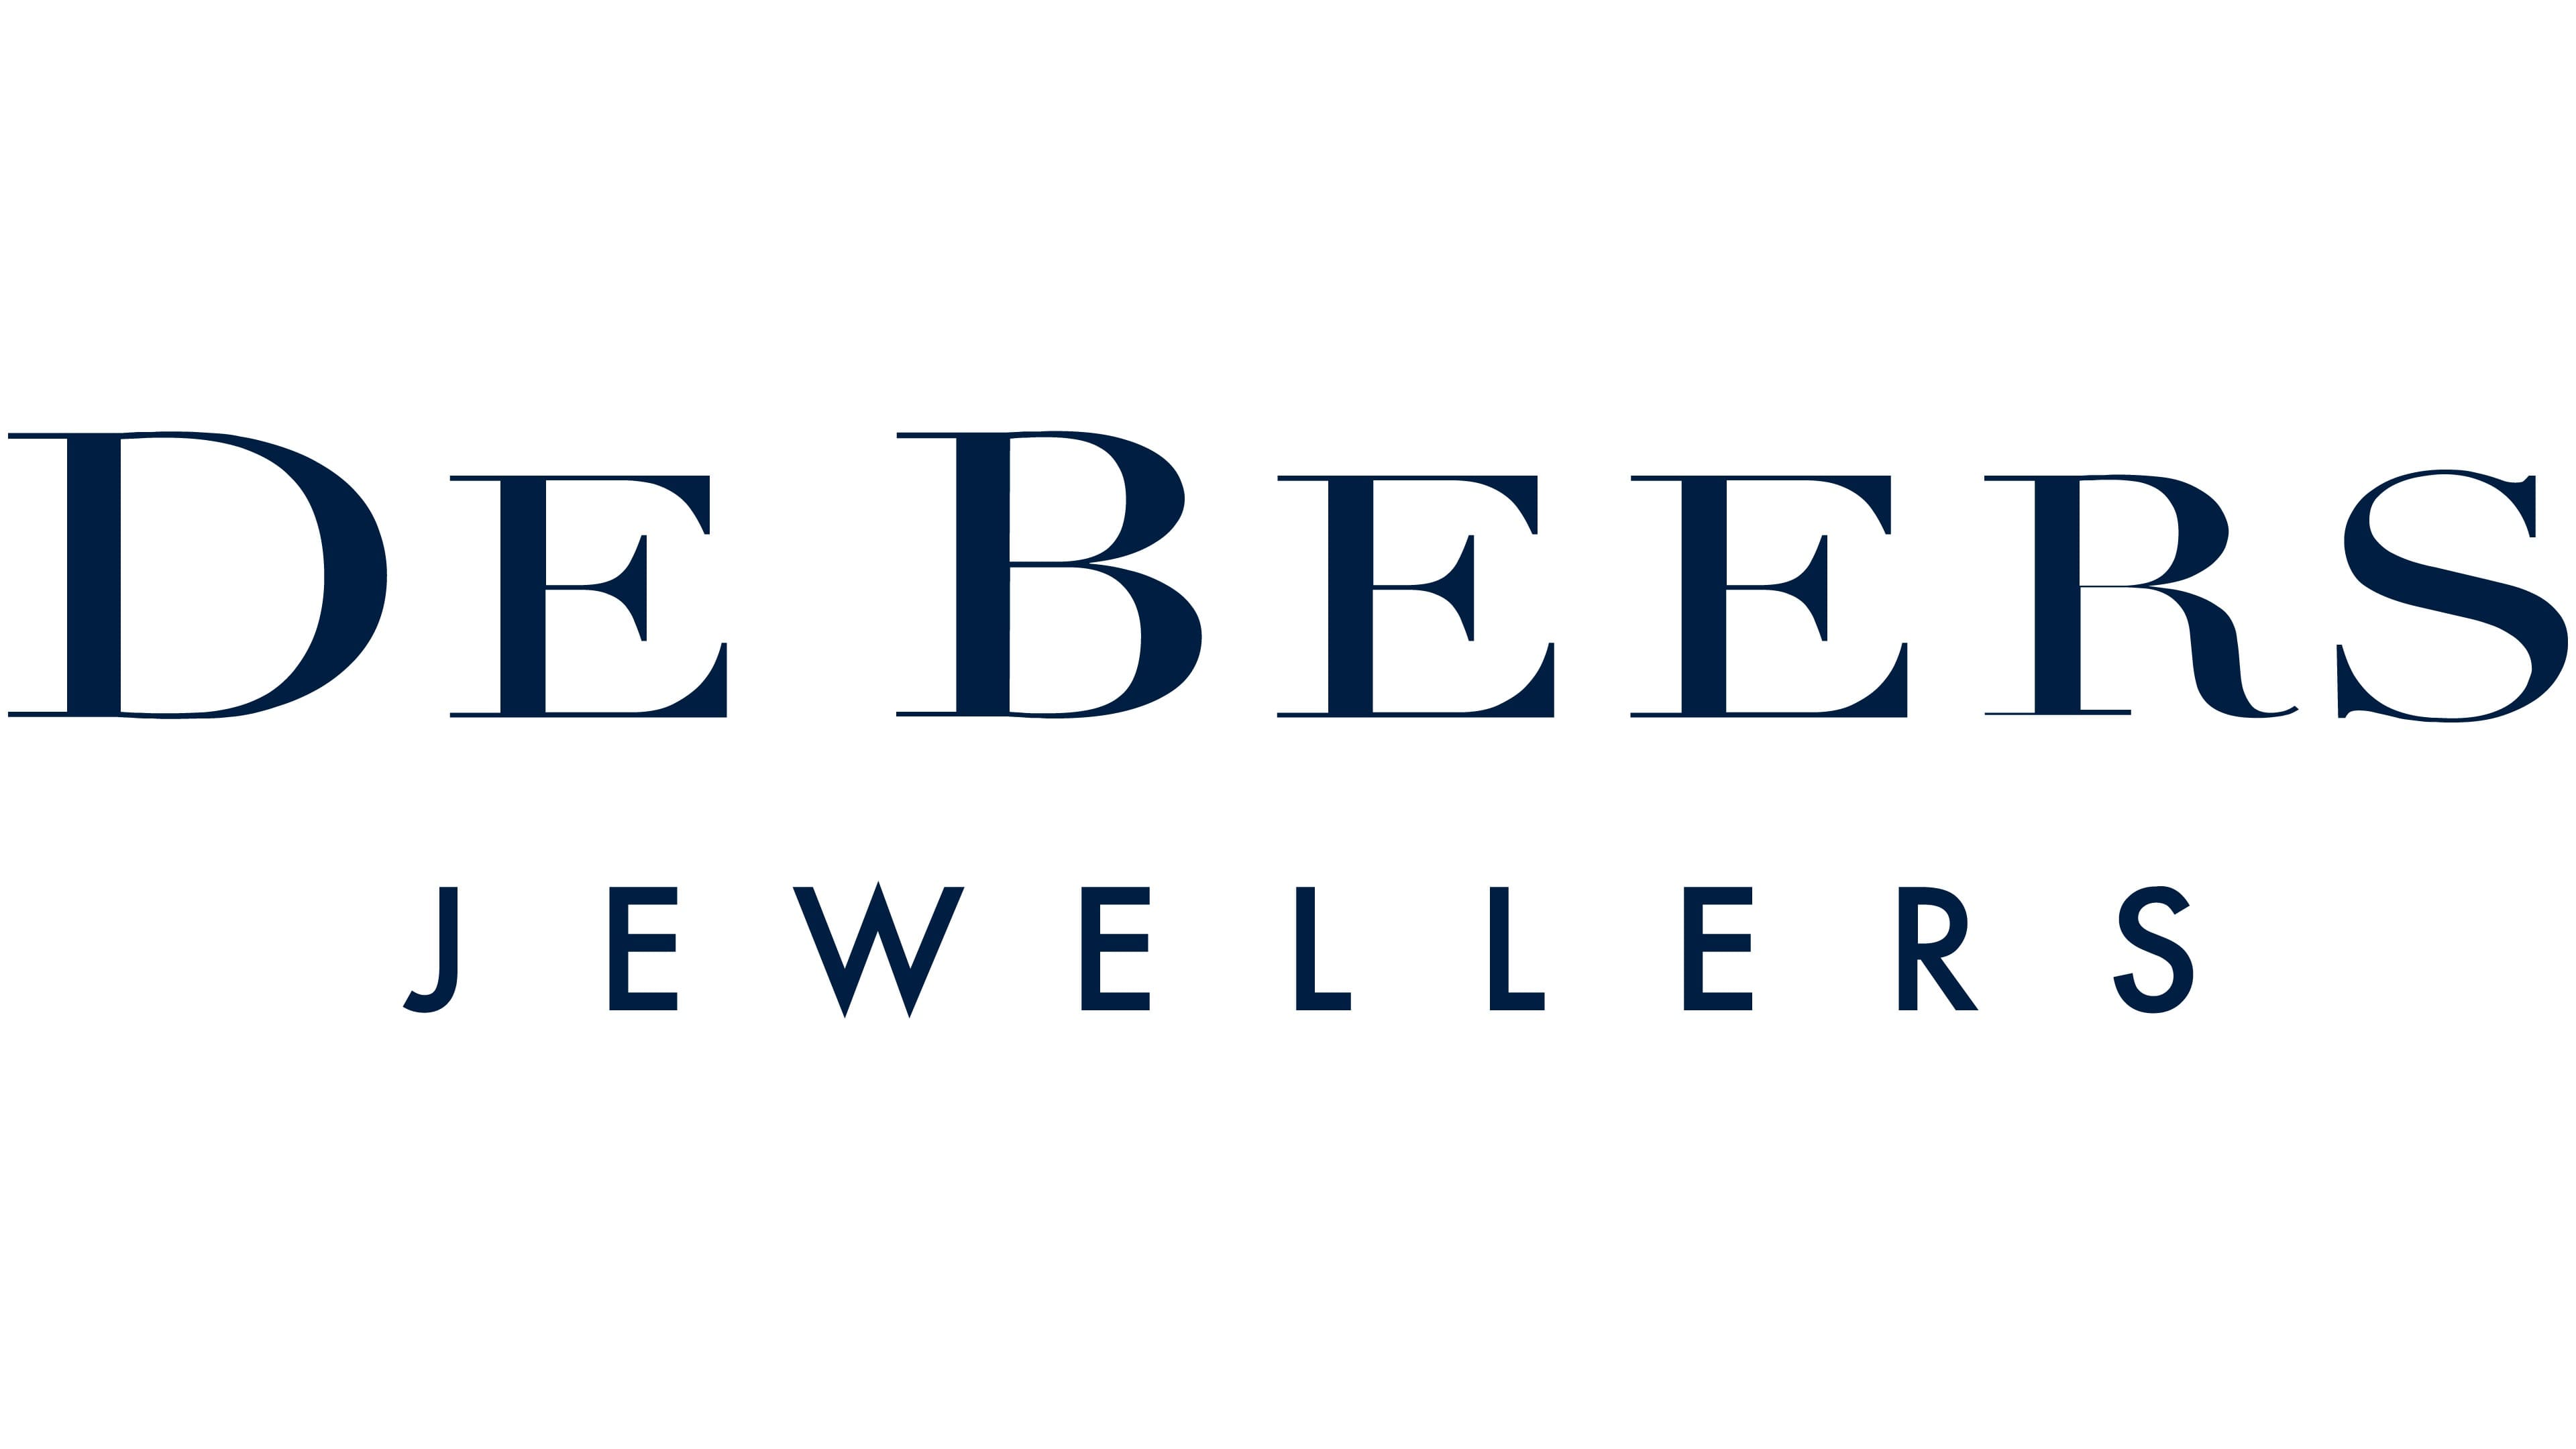 De Beers Consolidated Mines Logo PNG Vector (CDR) Free Download